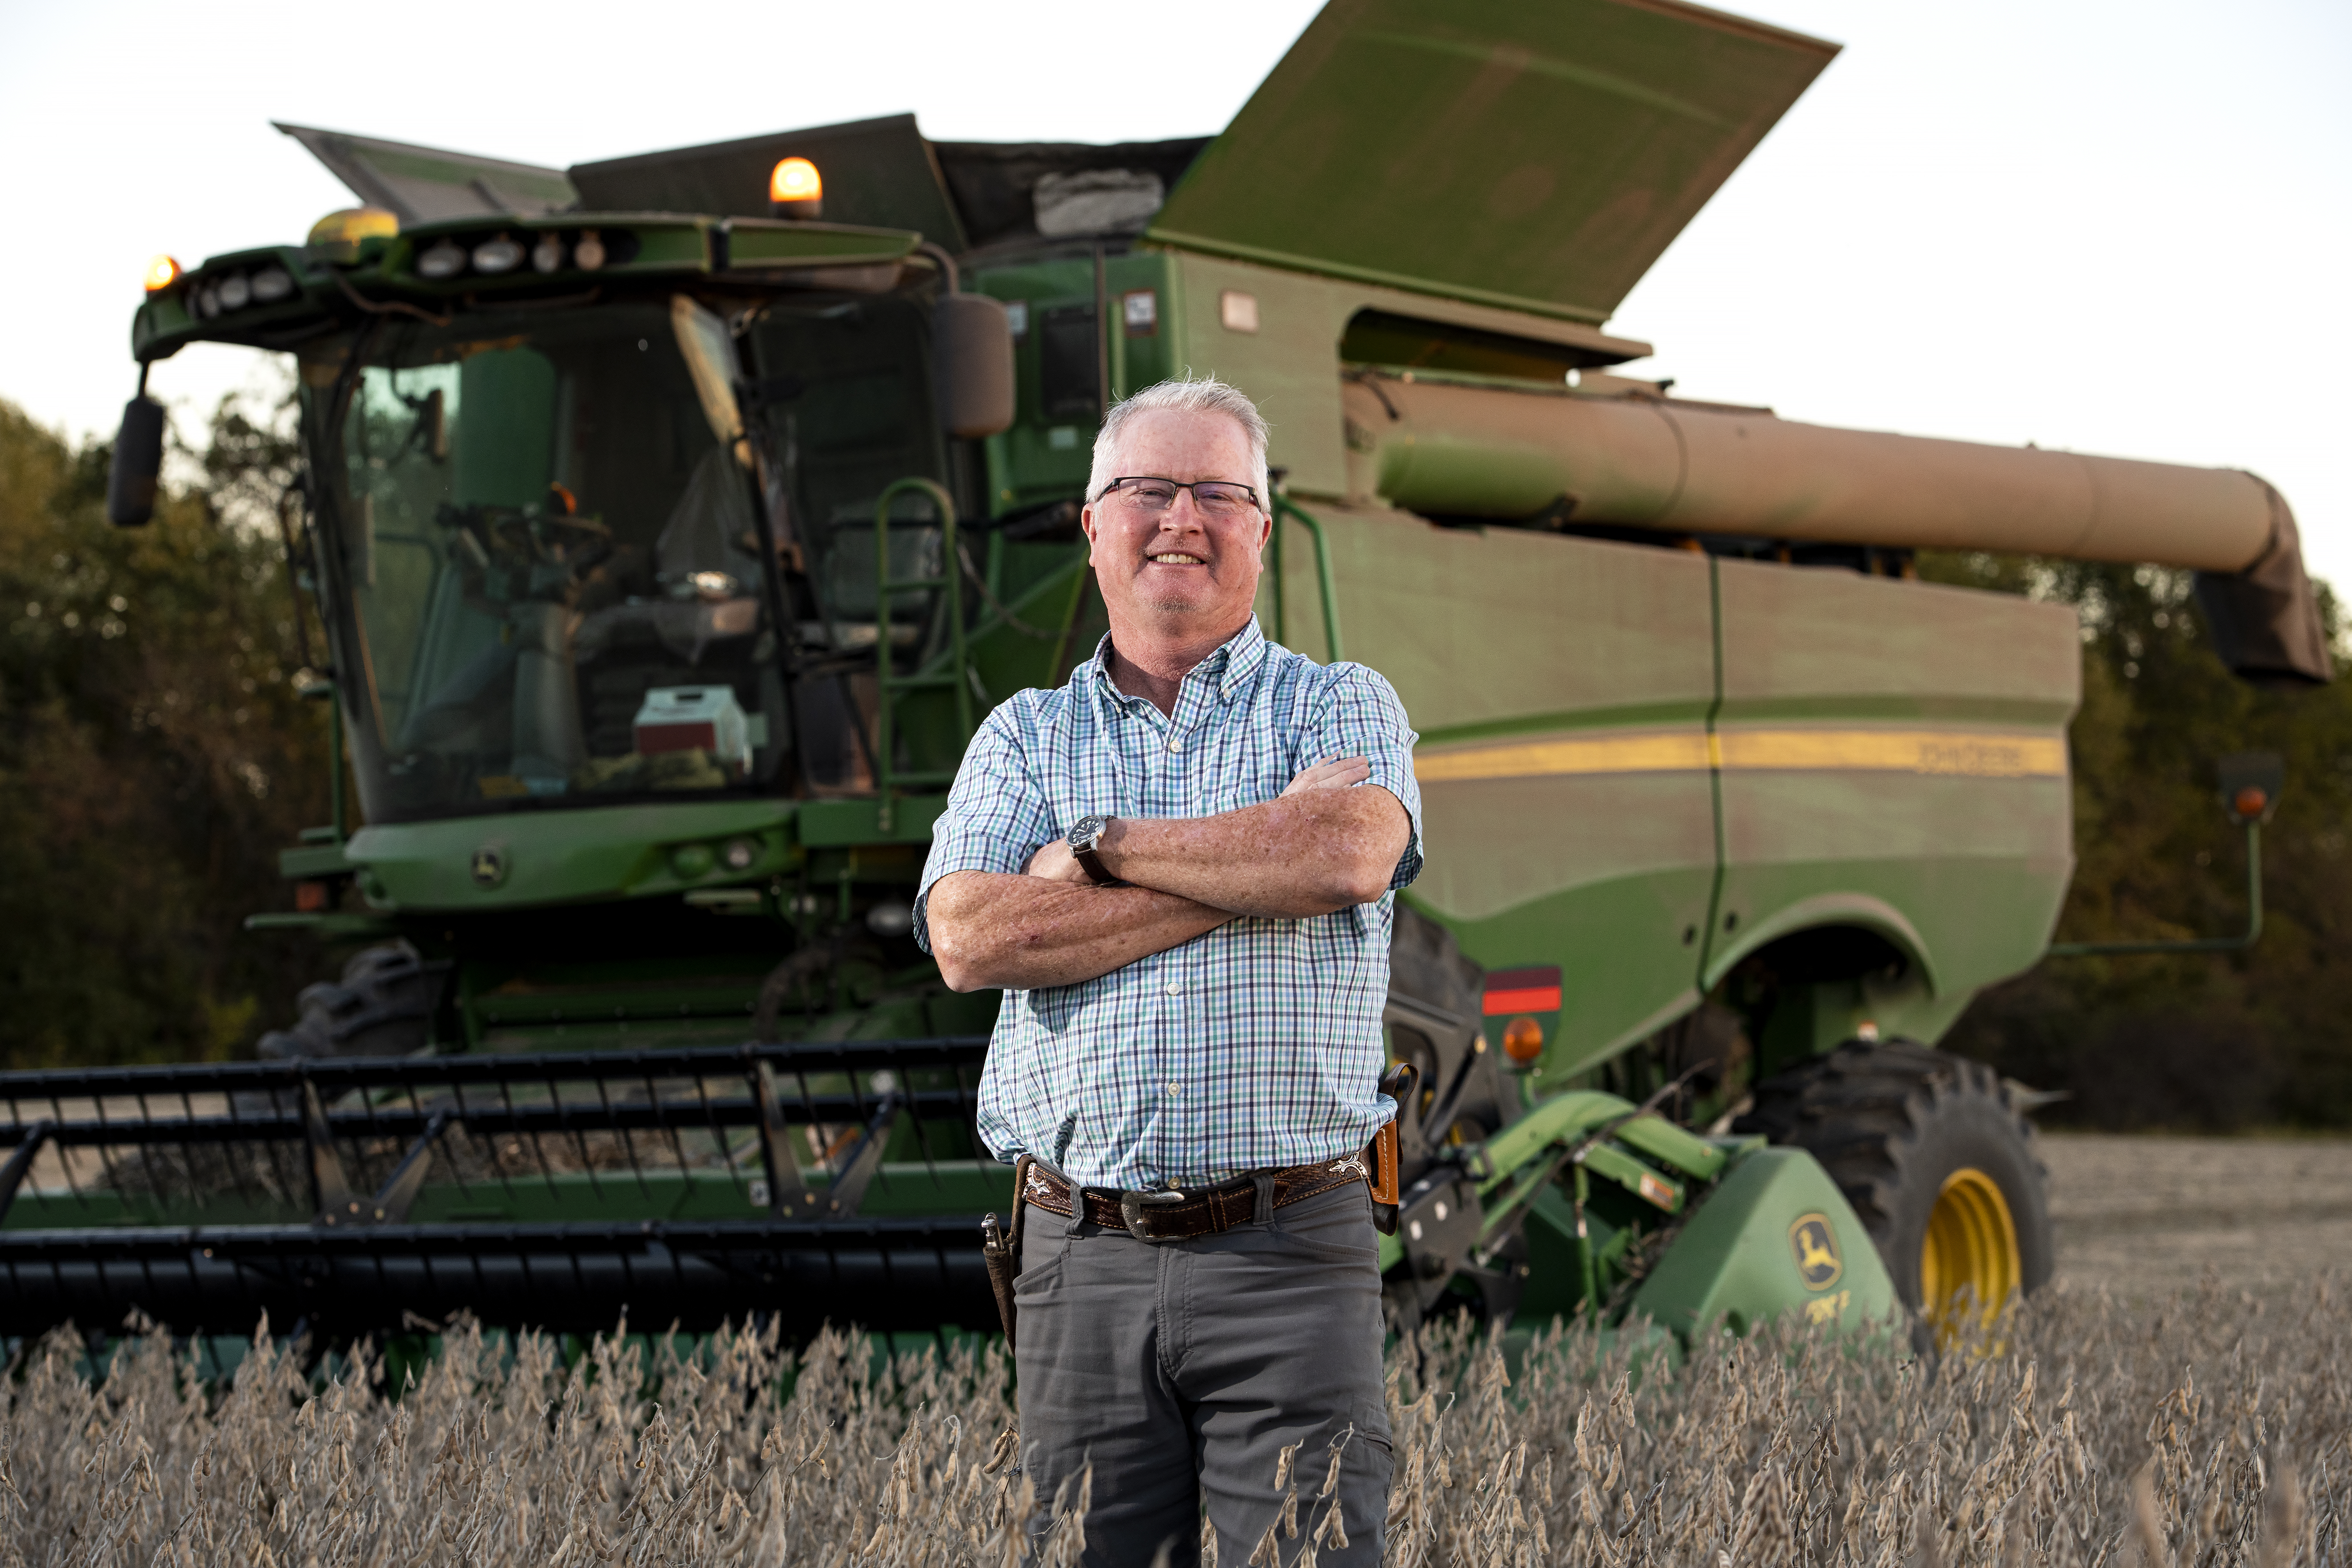 Ronnie Russell in front of a john deere machine